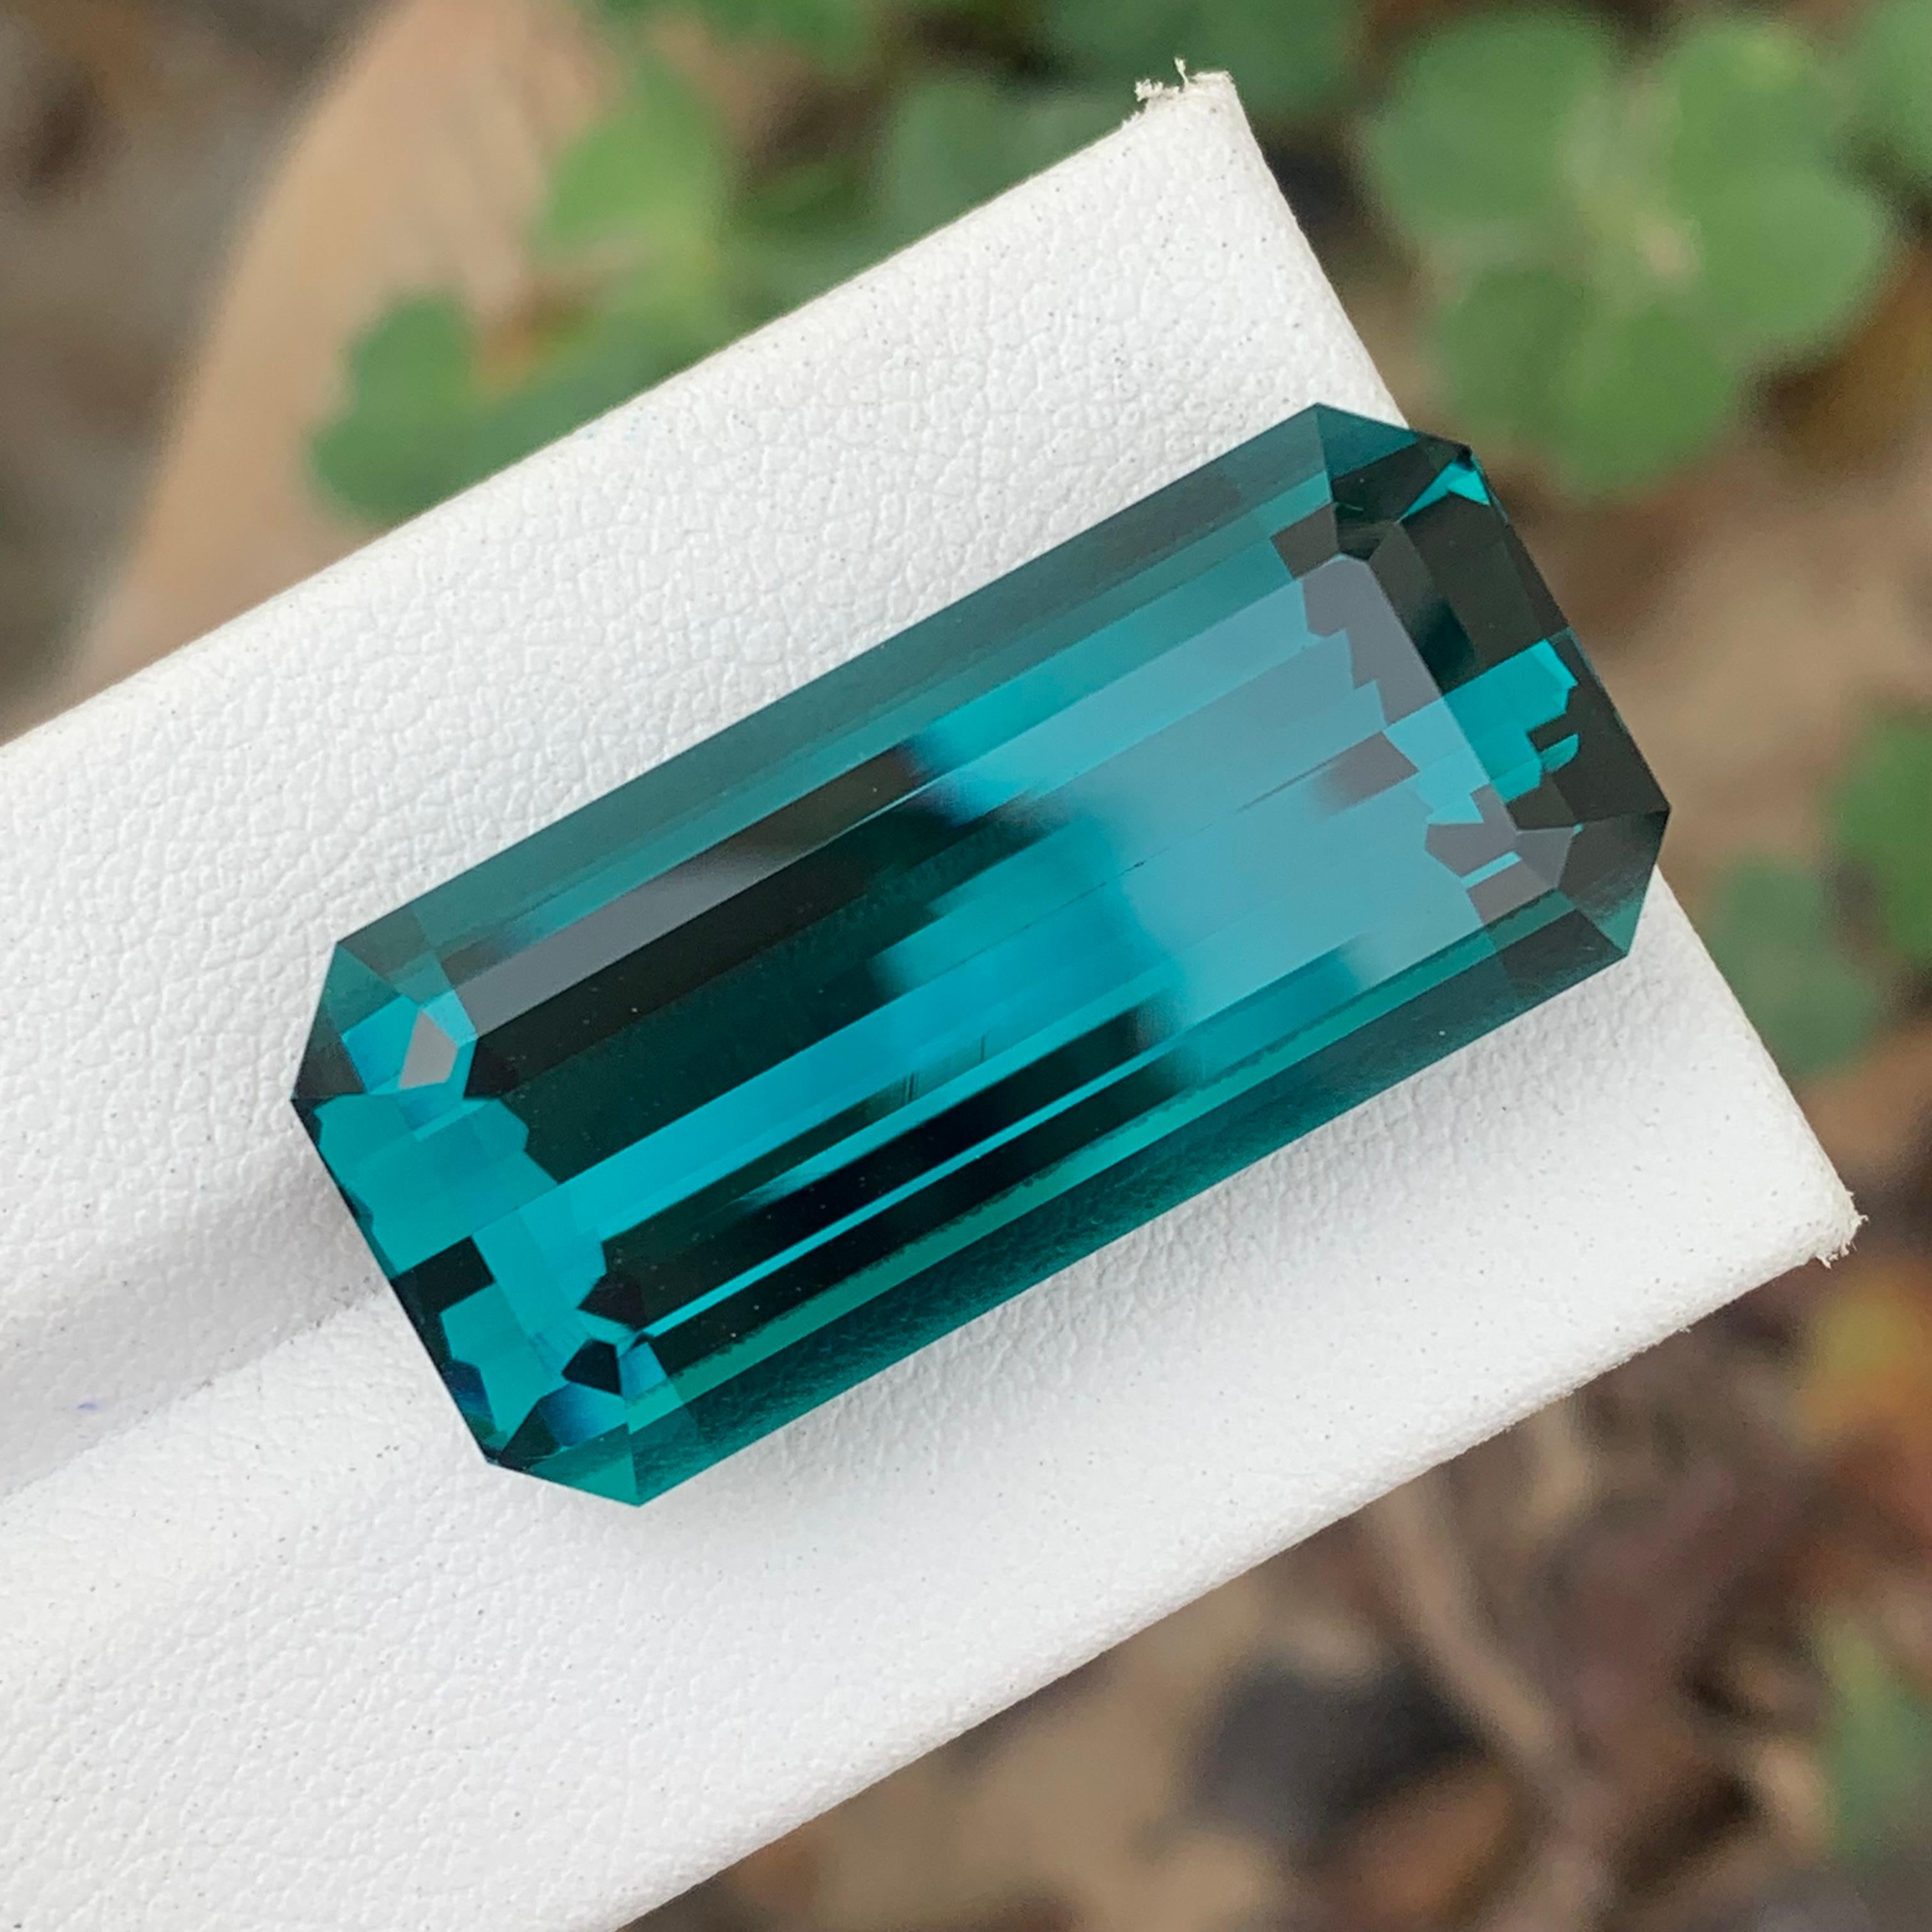 Gorgeous Loose Indicolite Tourmaline
Weight: 40.80 Carats
Dimension:31x15.1x9.7 Mm
Origin; Kunar Afghanistan Mine
Color: Blue
Shape: Emerald 
Treatment: Non
Certificate: On Demand
.
Indicolite tourmalines (tourmalines with blue in them) are rare.